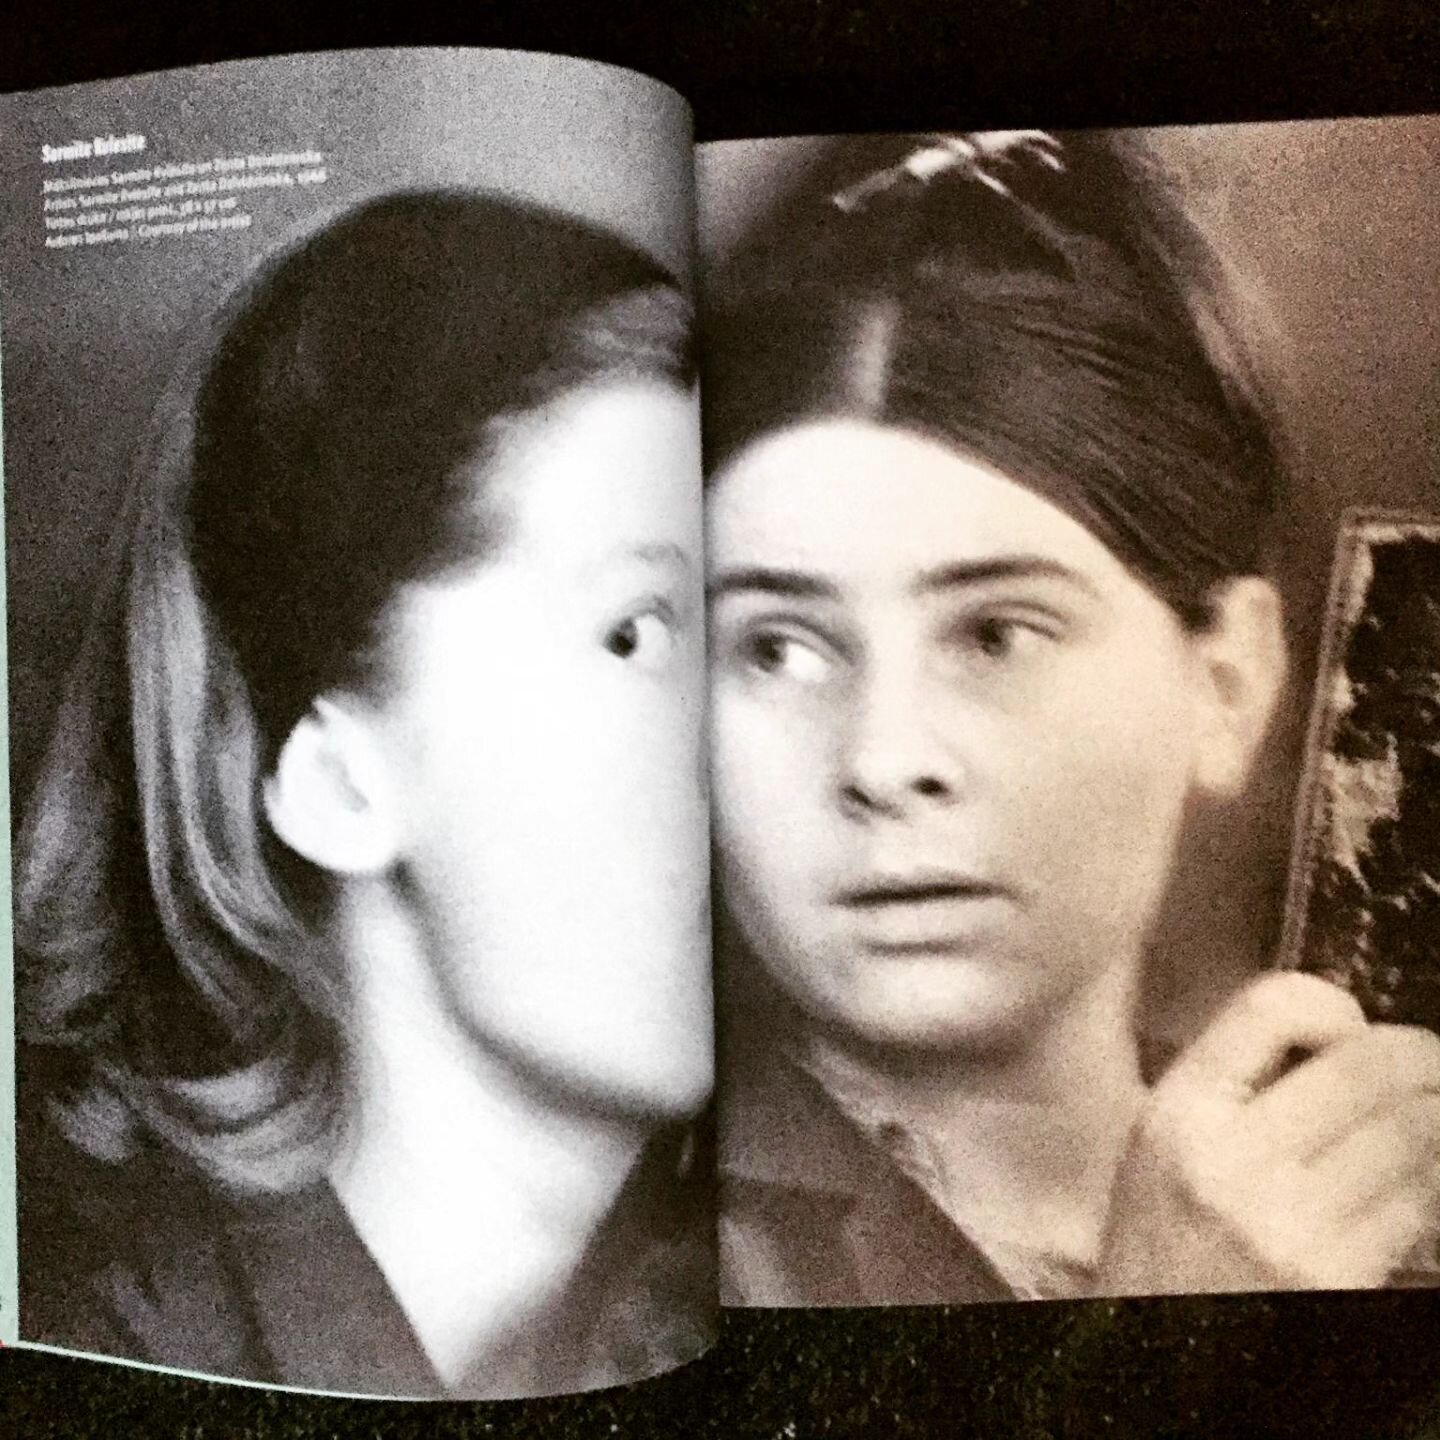 A few pages from the exhibition catalogue. First image is a double portrait by photographer Sarmīte Kviesīte together with Zenta Dzividzinska. The catalogue accompanies the exhibition entitled &quot;Don&rsquo;t Cry! Feminist Perspectives in Latvian A